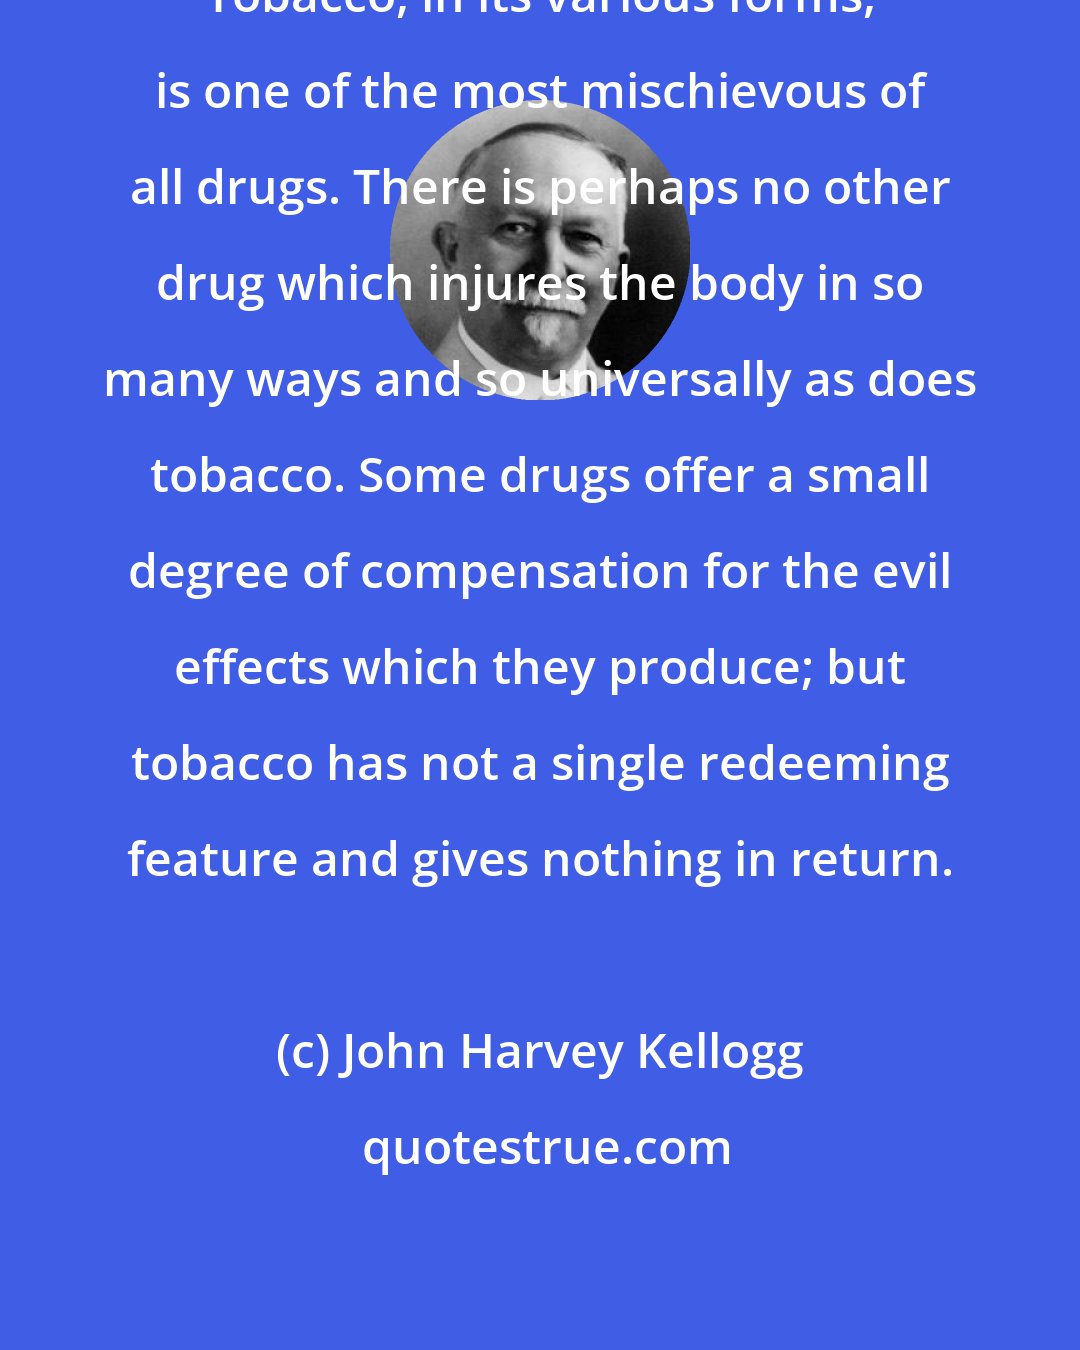 John Harvey Kellogg: Tobacco, in its various forms, is one of the most mischievous of all drugs. There is perhaps no other drug which injures the body in so many ways and so universally as does tobacco. Some drugs offer a small degree of compensation for the evil effects which they produce; but tobacco has not a single redeeming feature and gives nothing in return.